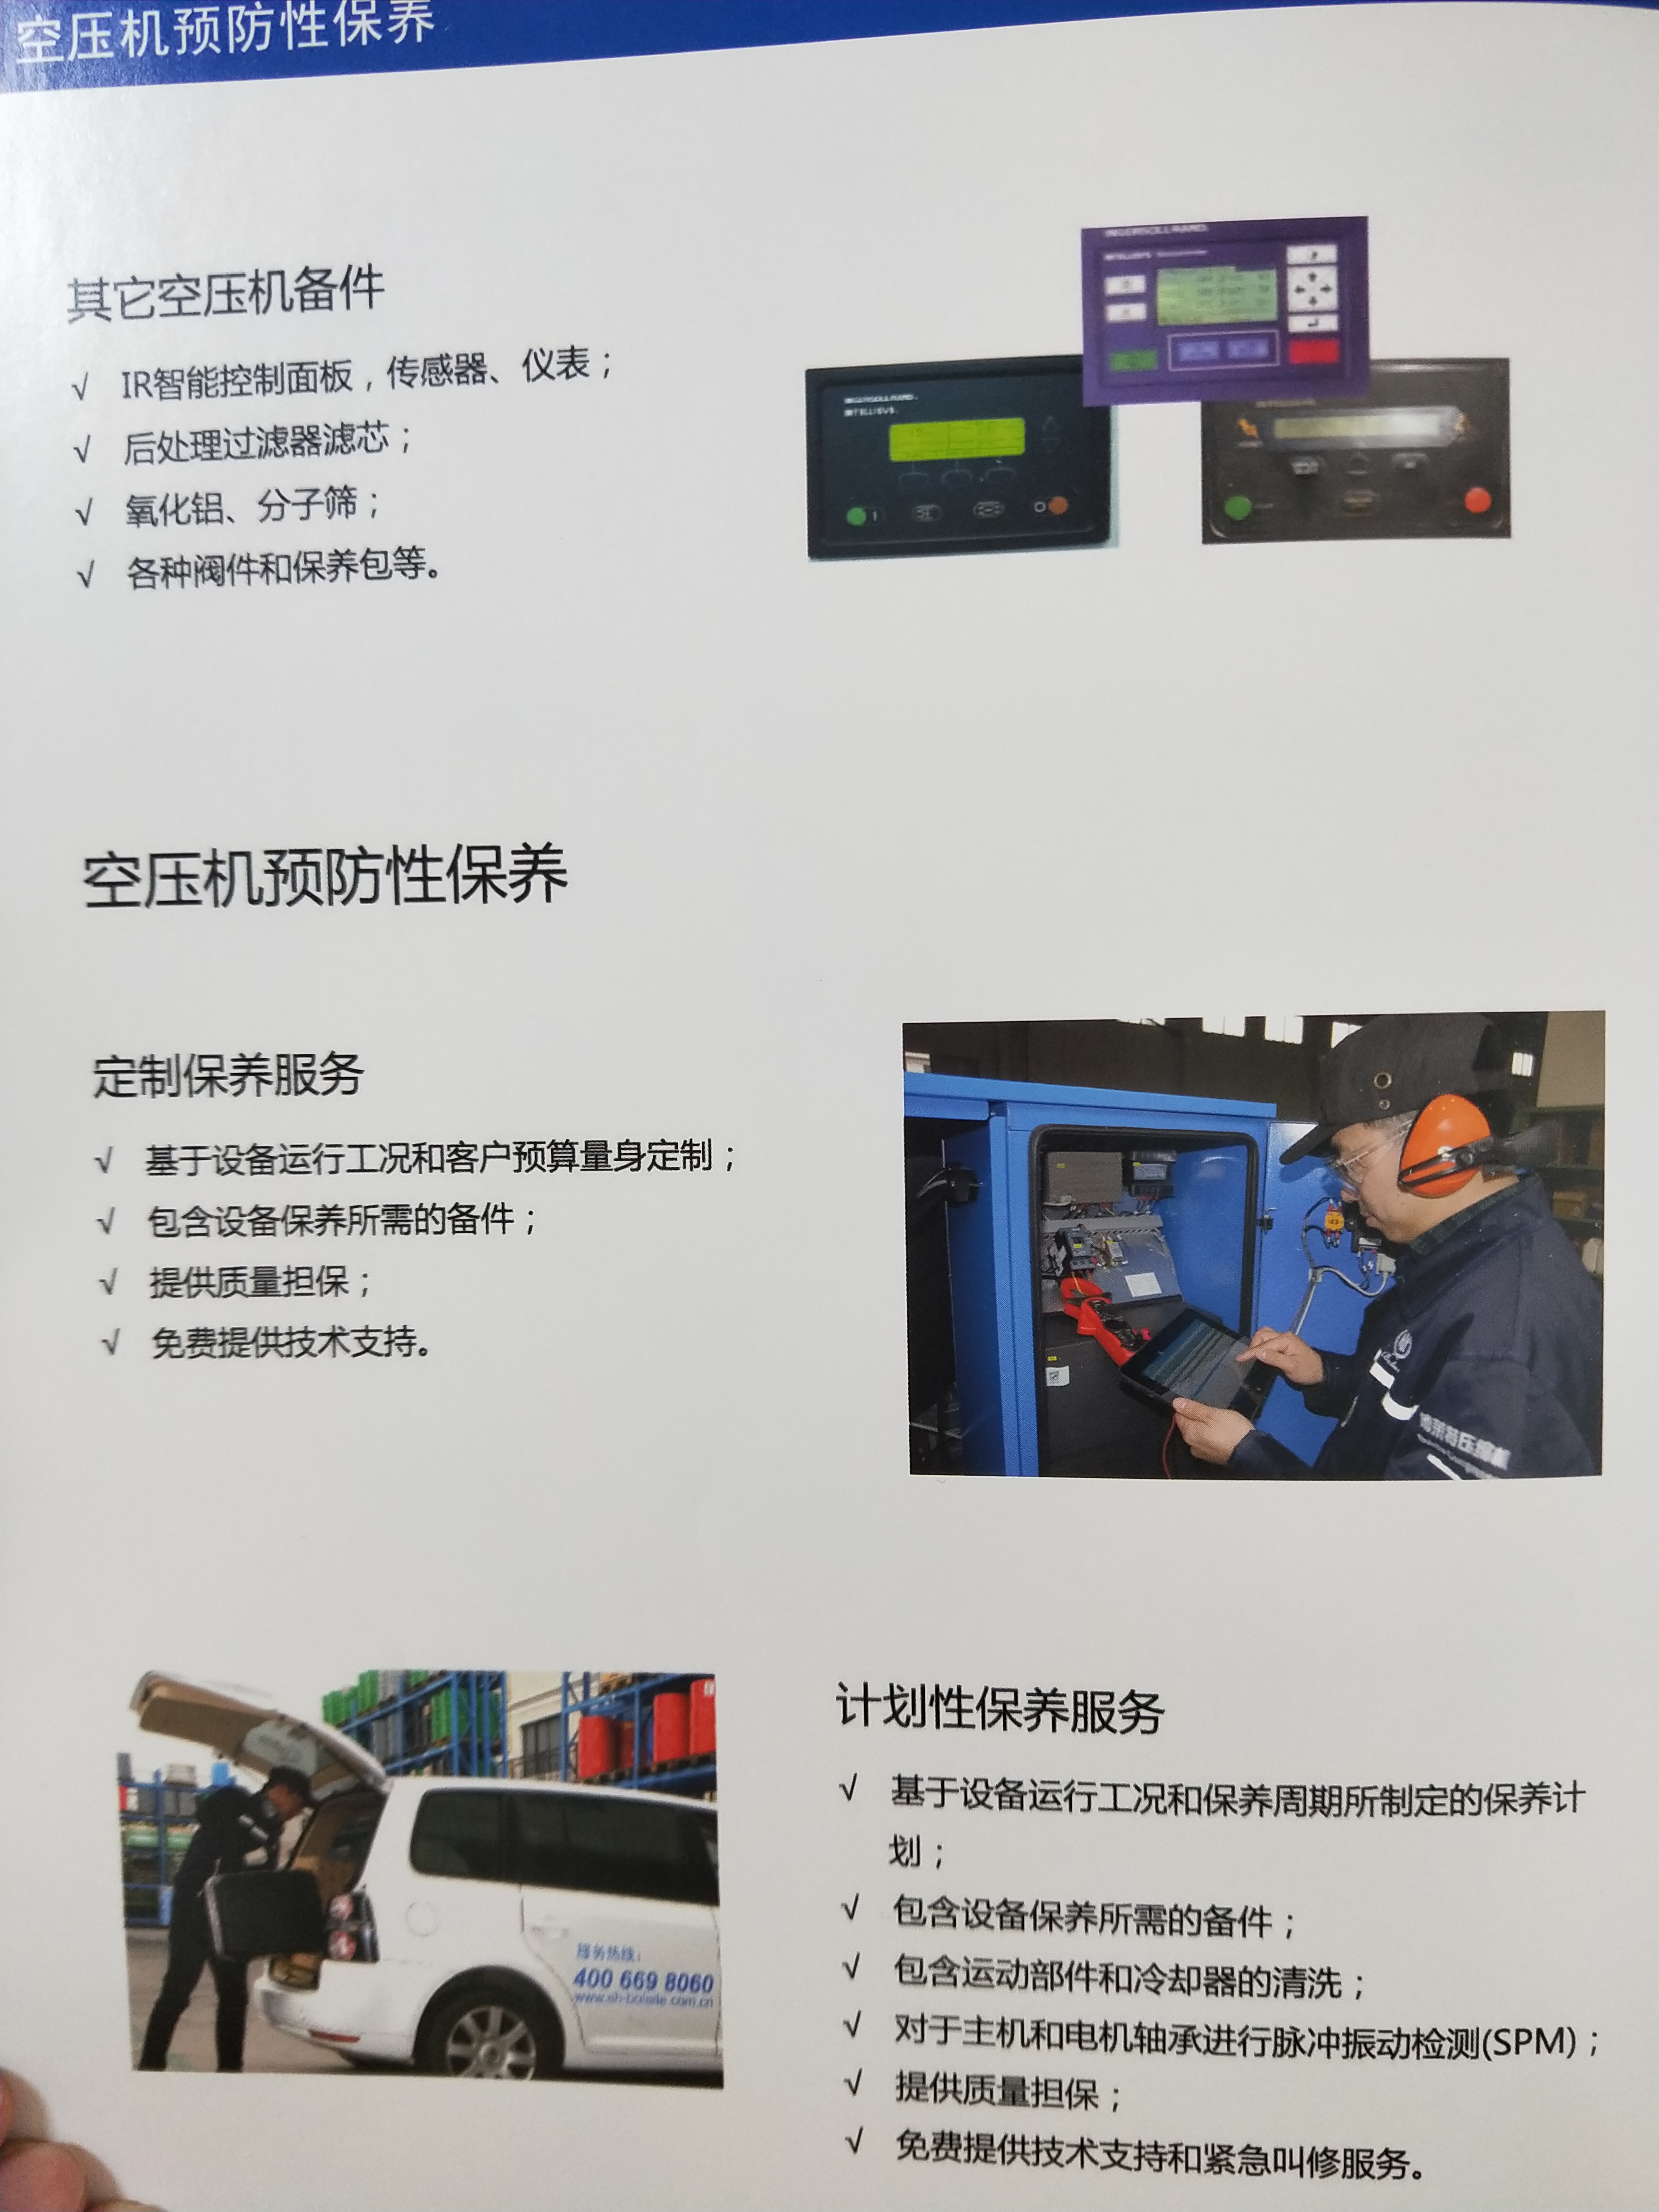 BLW-100A PM screw oil-free compressor on-site maintenance service for Bolaite water lubricated air compressor